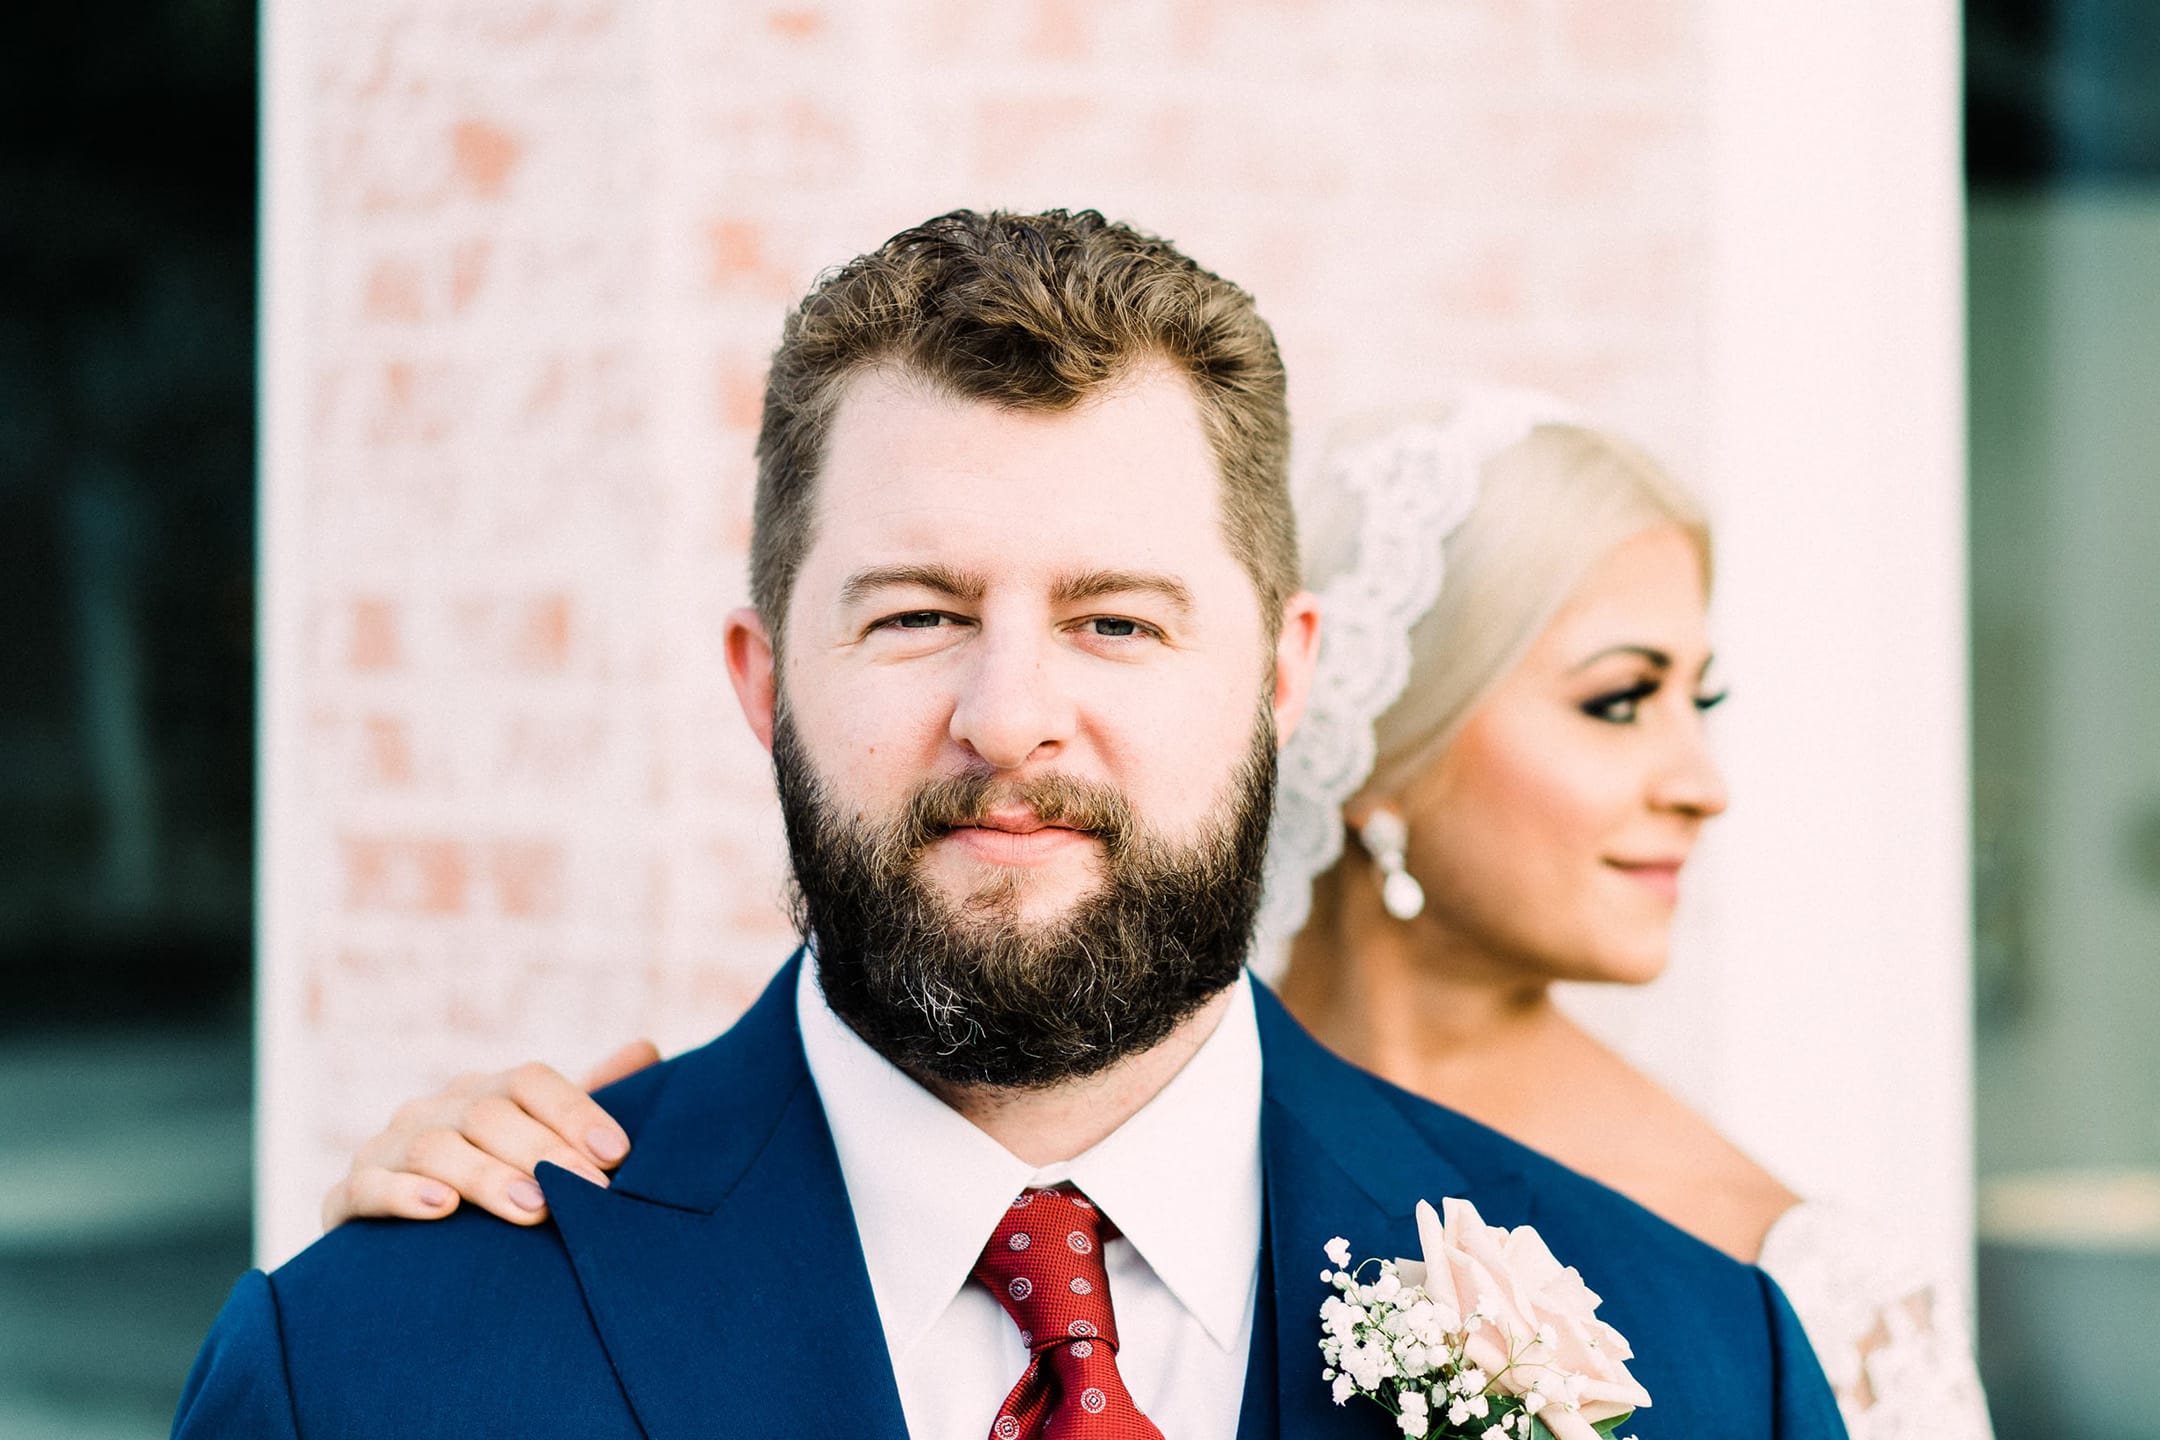 Groom stares into the camera while bride looks away.